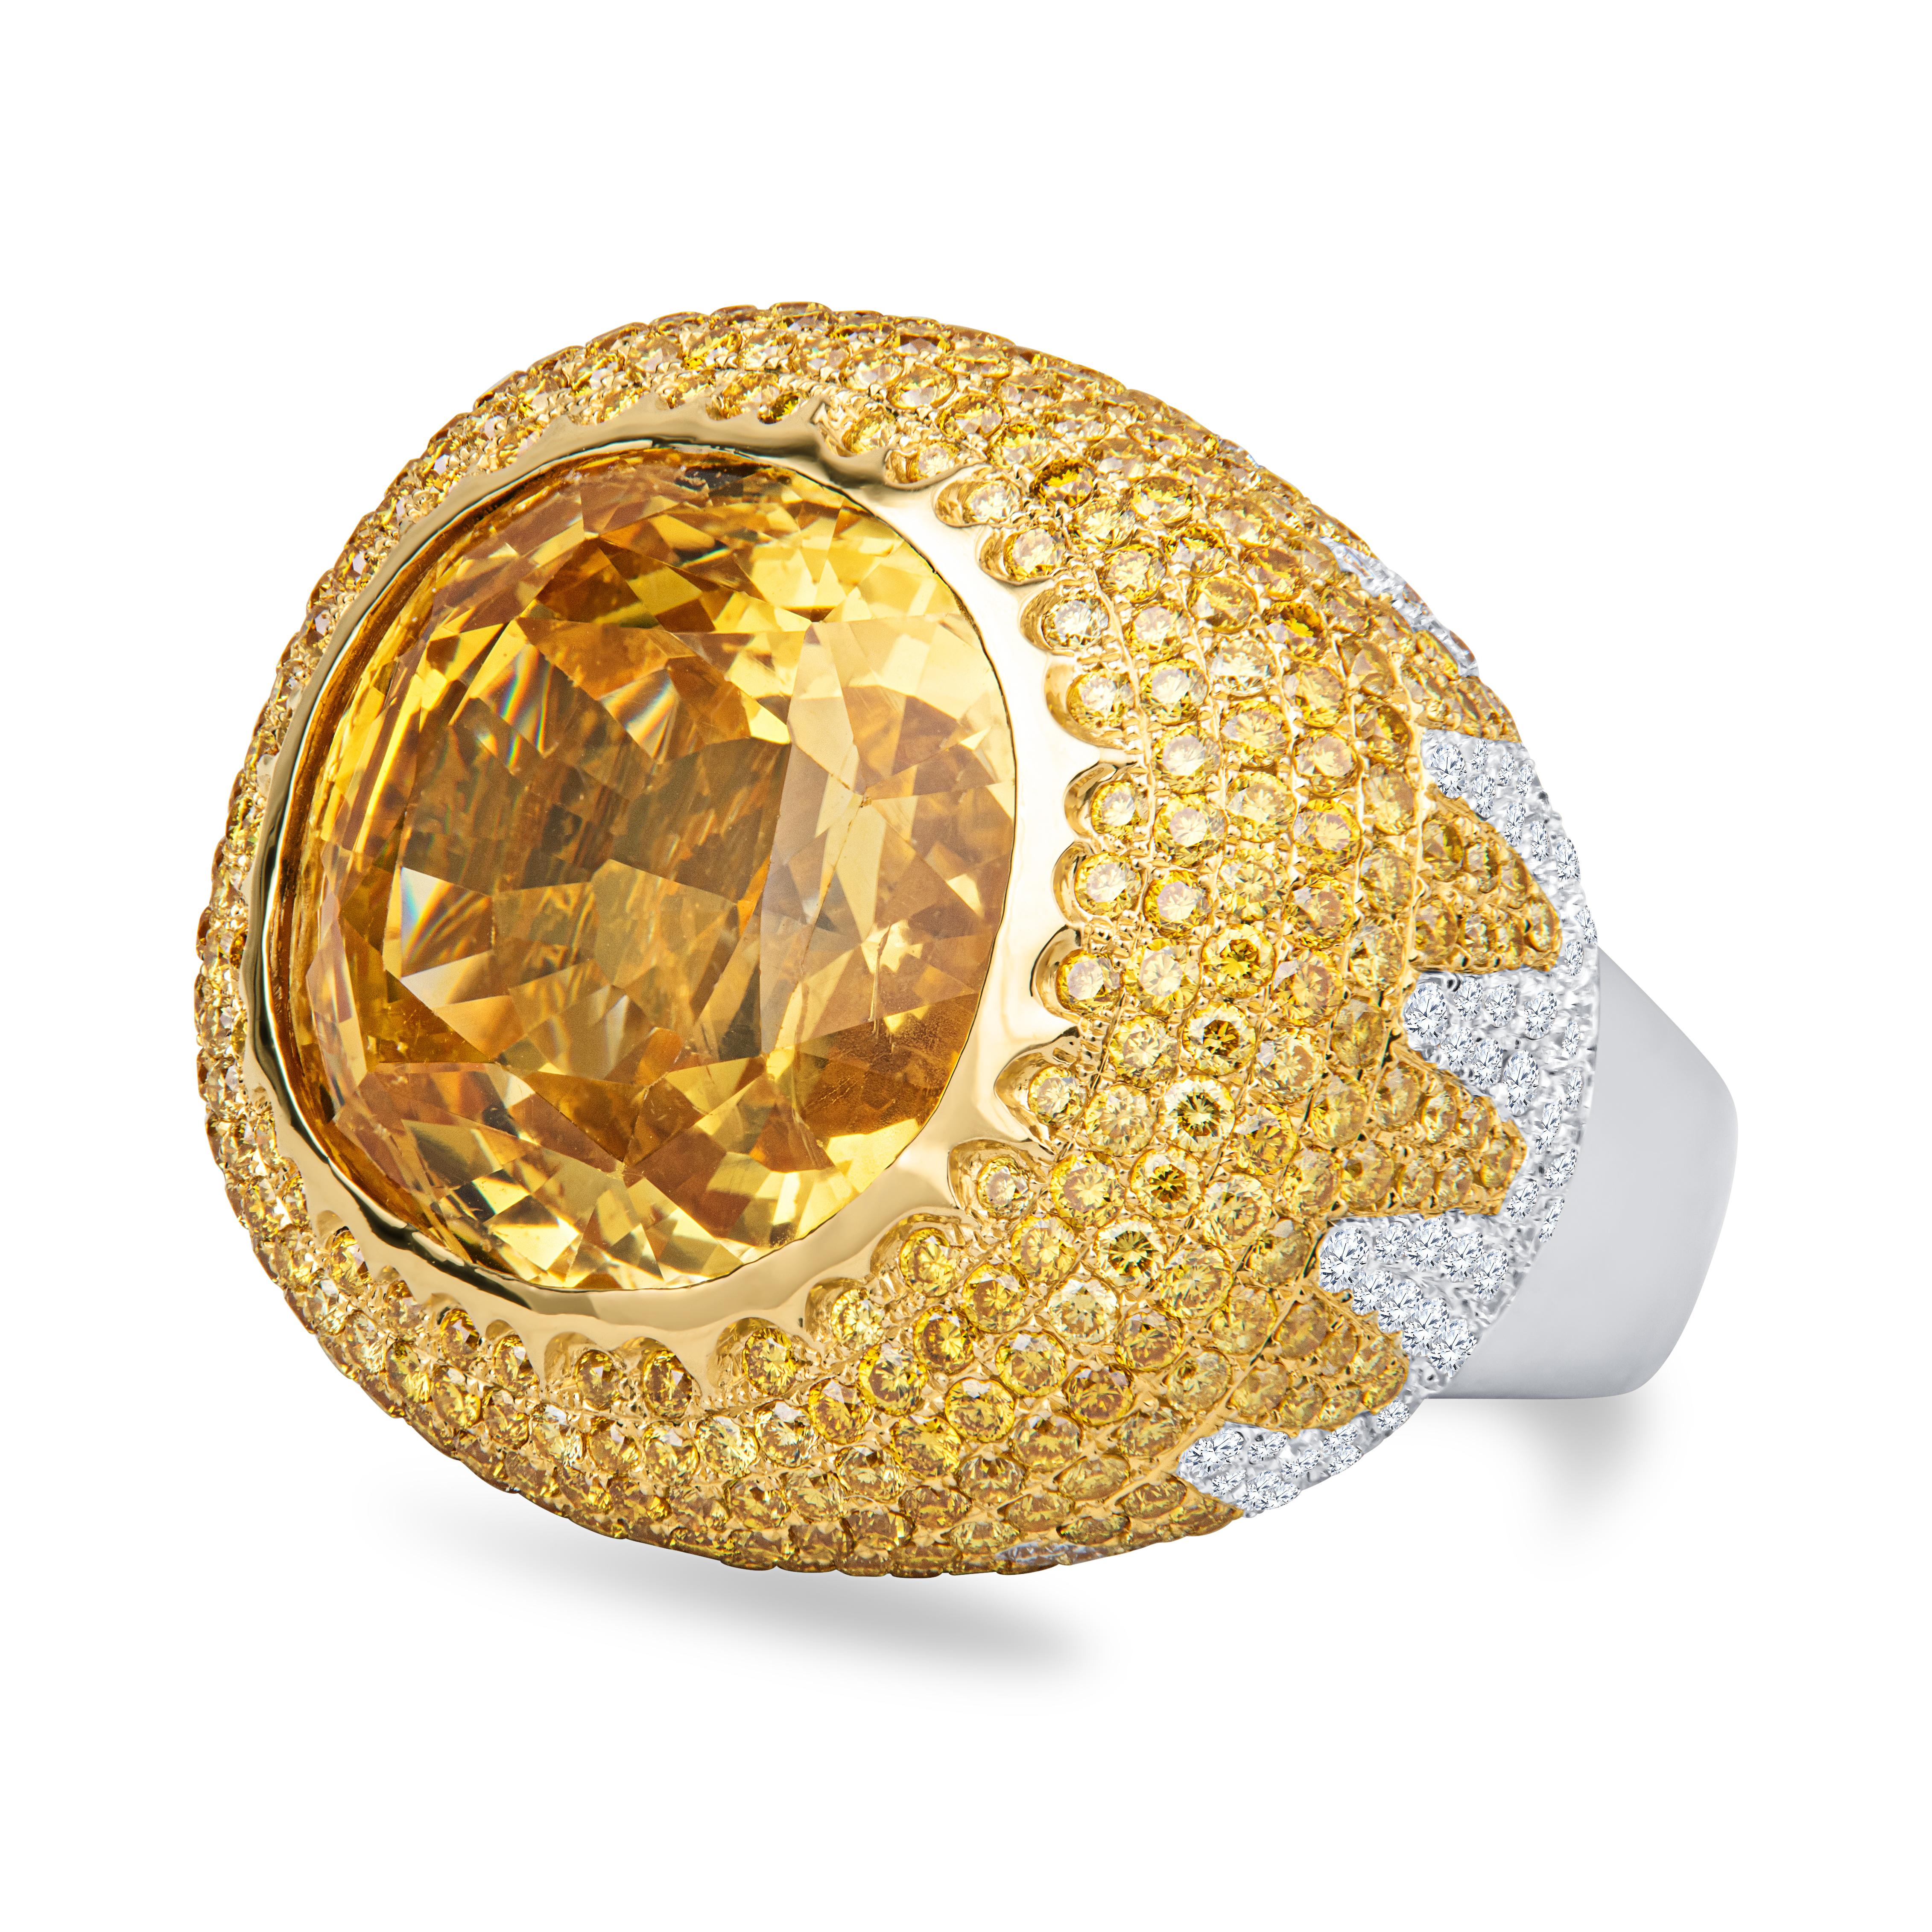 This award-winning, jaw-dropping ring features a 60.15ct natural, no heat, oval cut, Sri Lanka (Ceylon) yellow sapphire (AGL CS 84674). The sapphire is a pure yellow with vivid saturation and exquisite cutting - truly a rare gem that will be